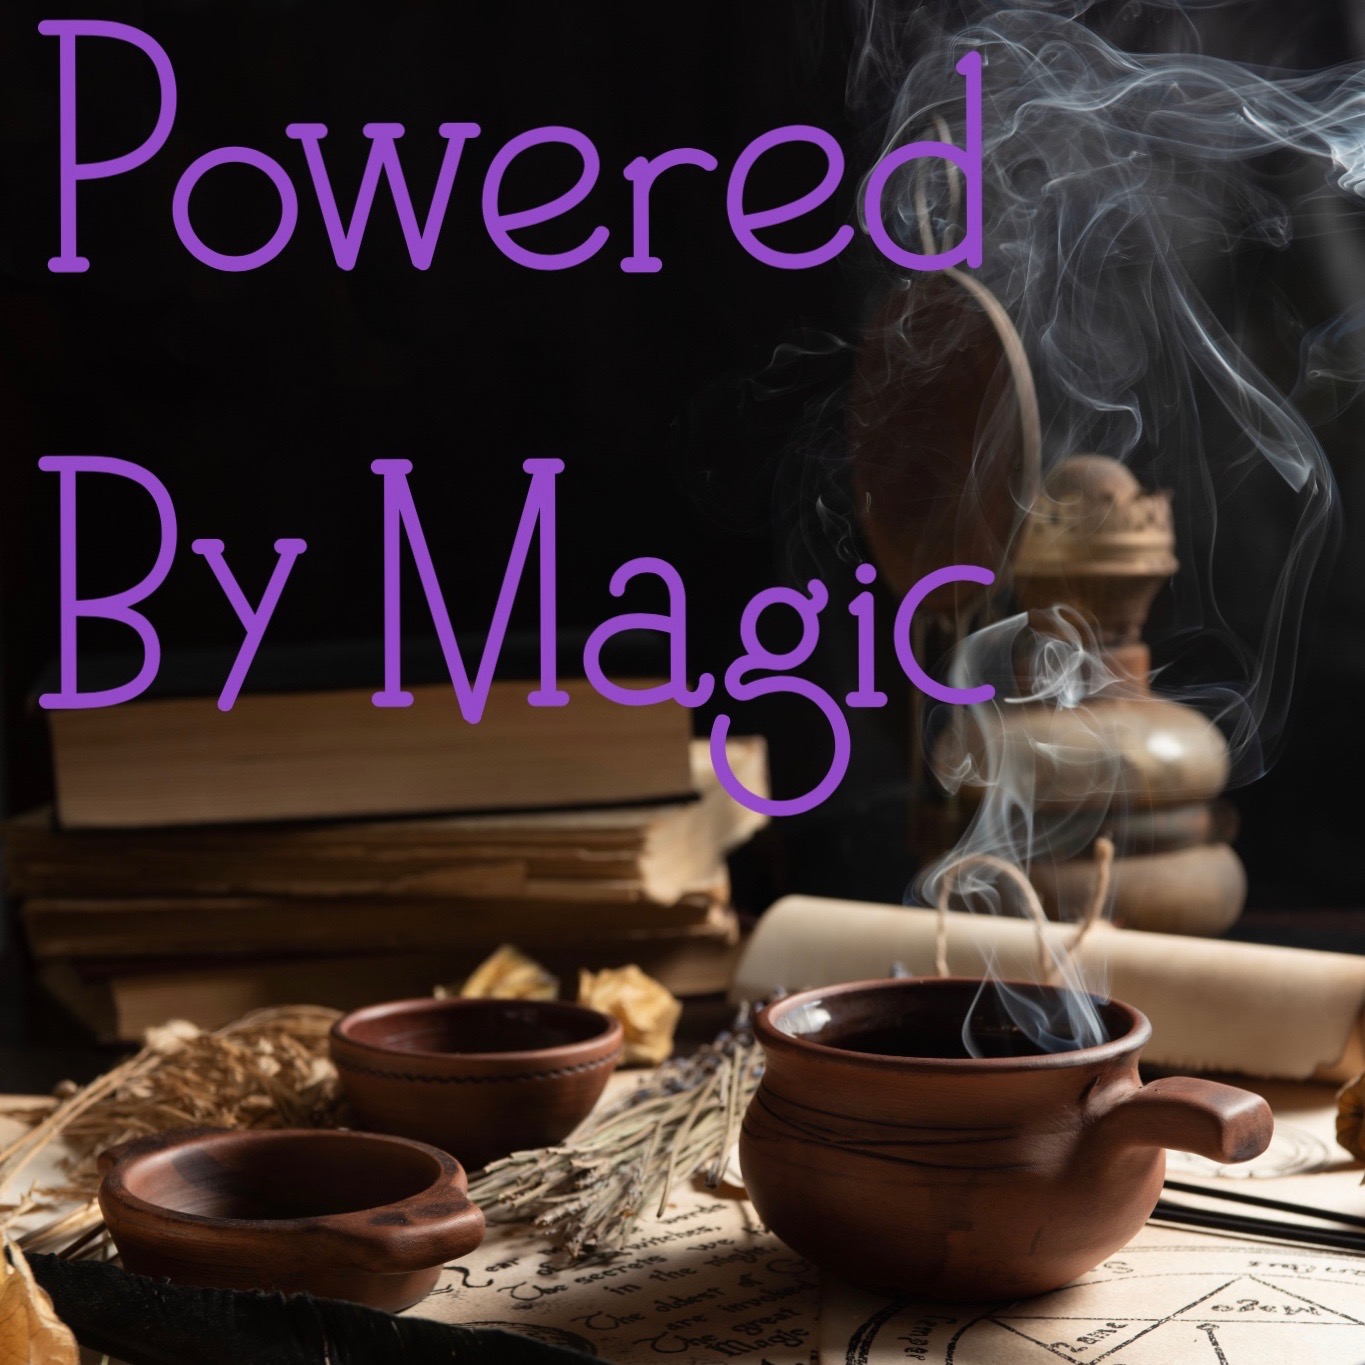 Powered By Magic